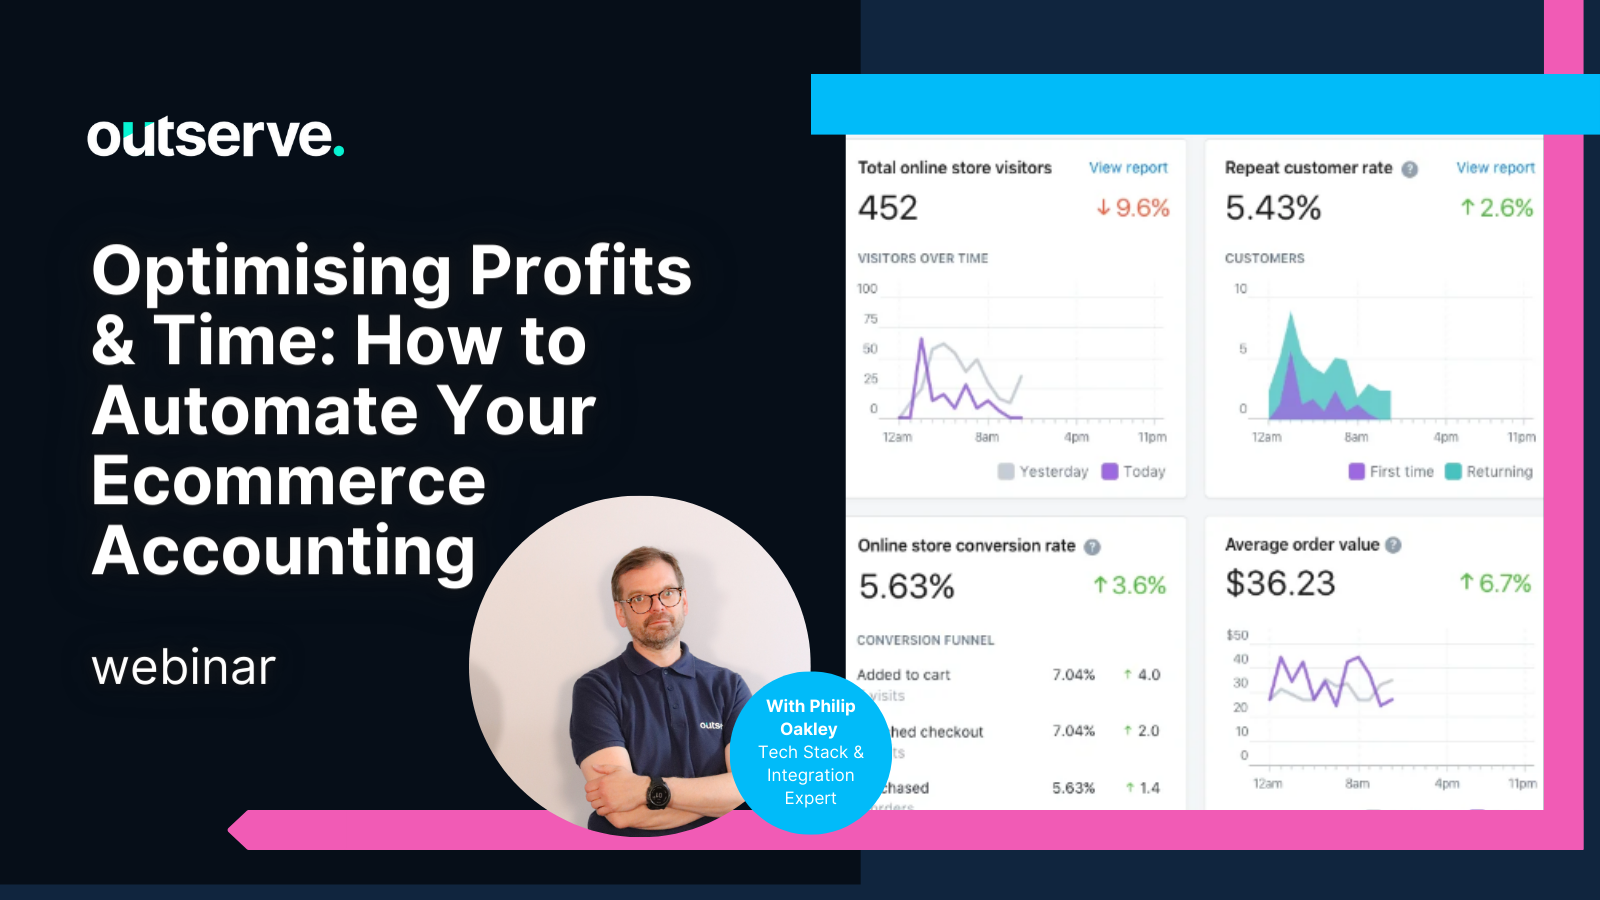 Optimising Profits & Time: How to Automate Your Ecommerce Accounting